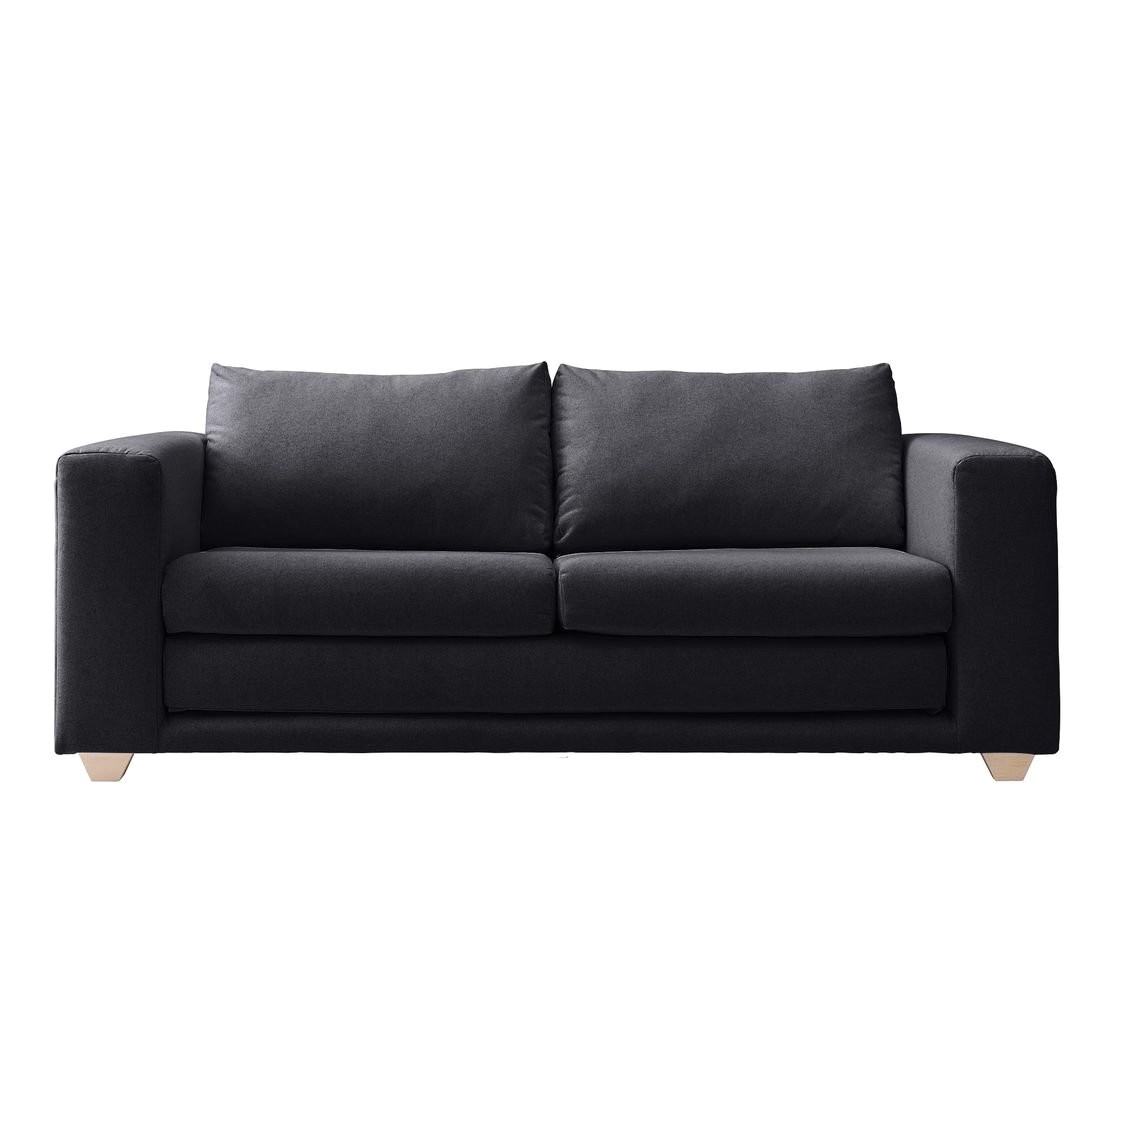 victor sofa bed